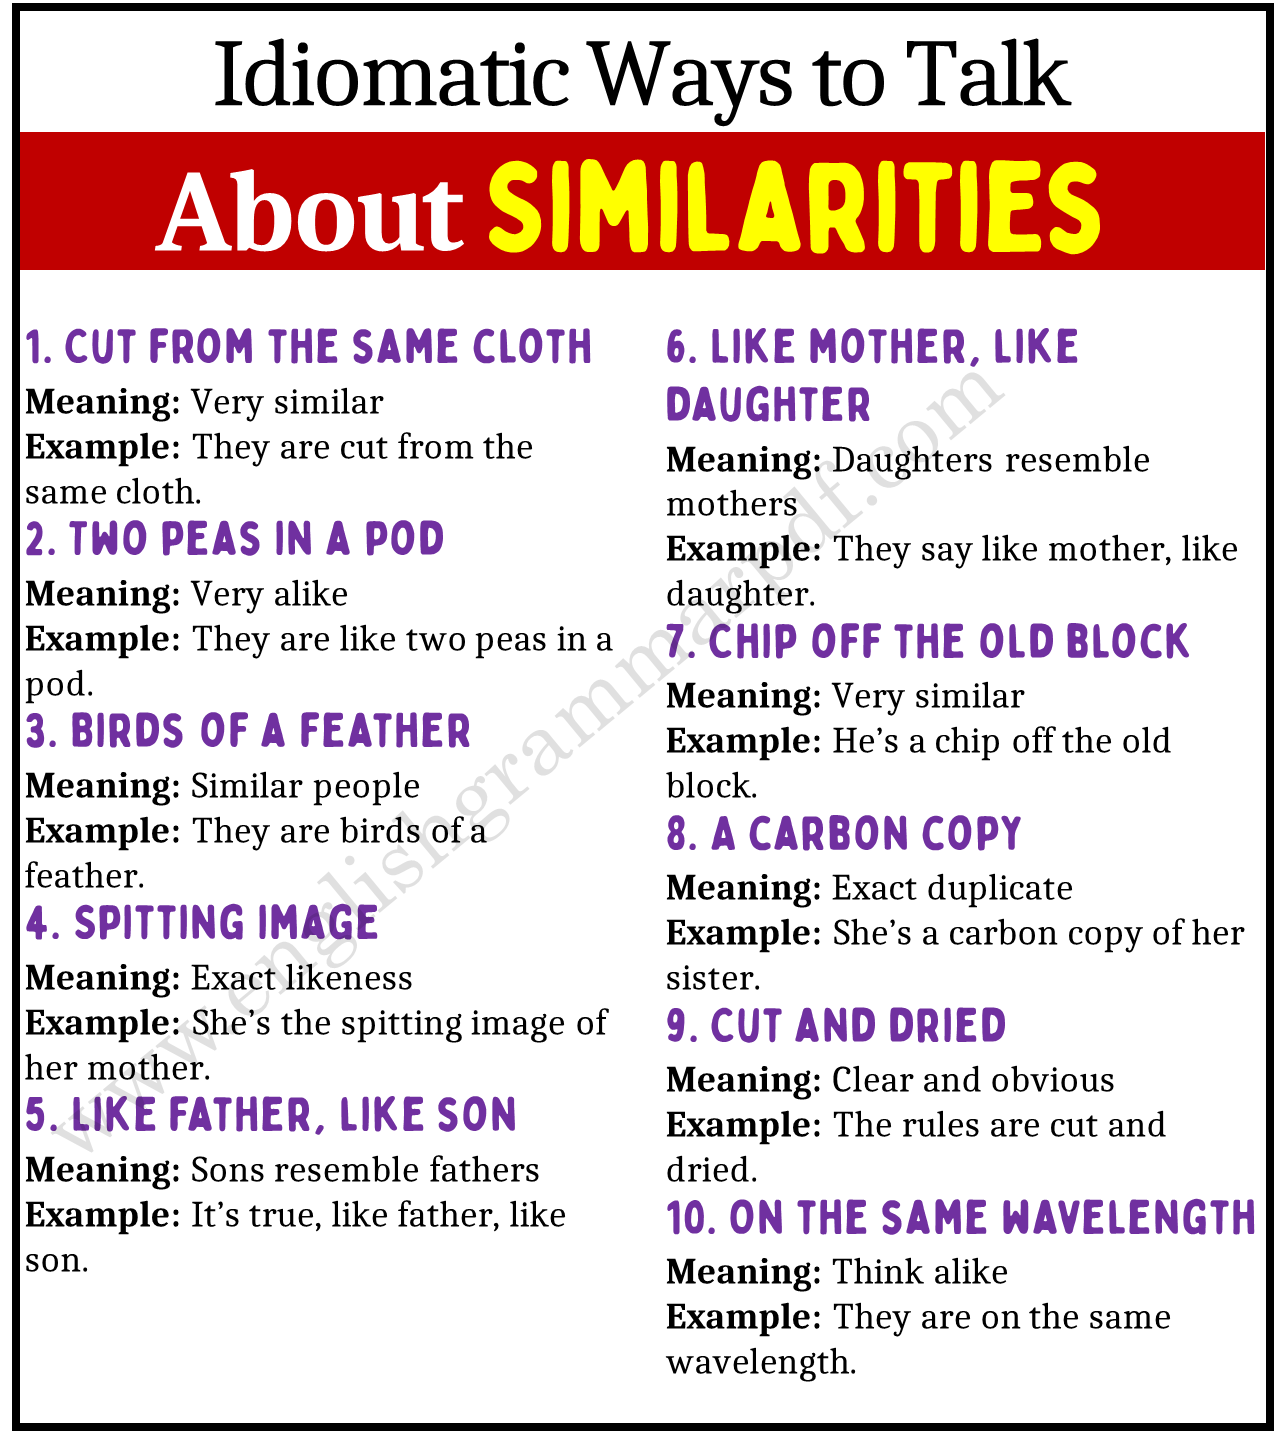 Idiomatic Ways to Talk about Similarities